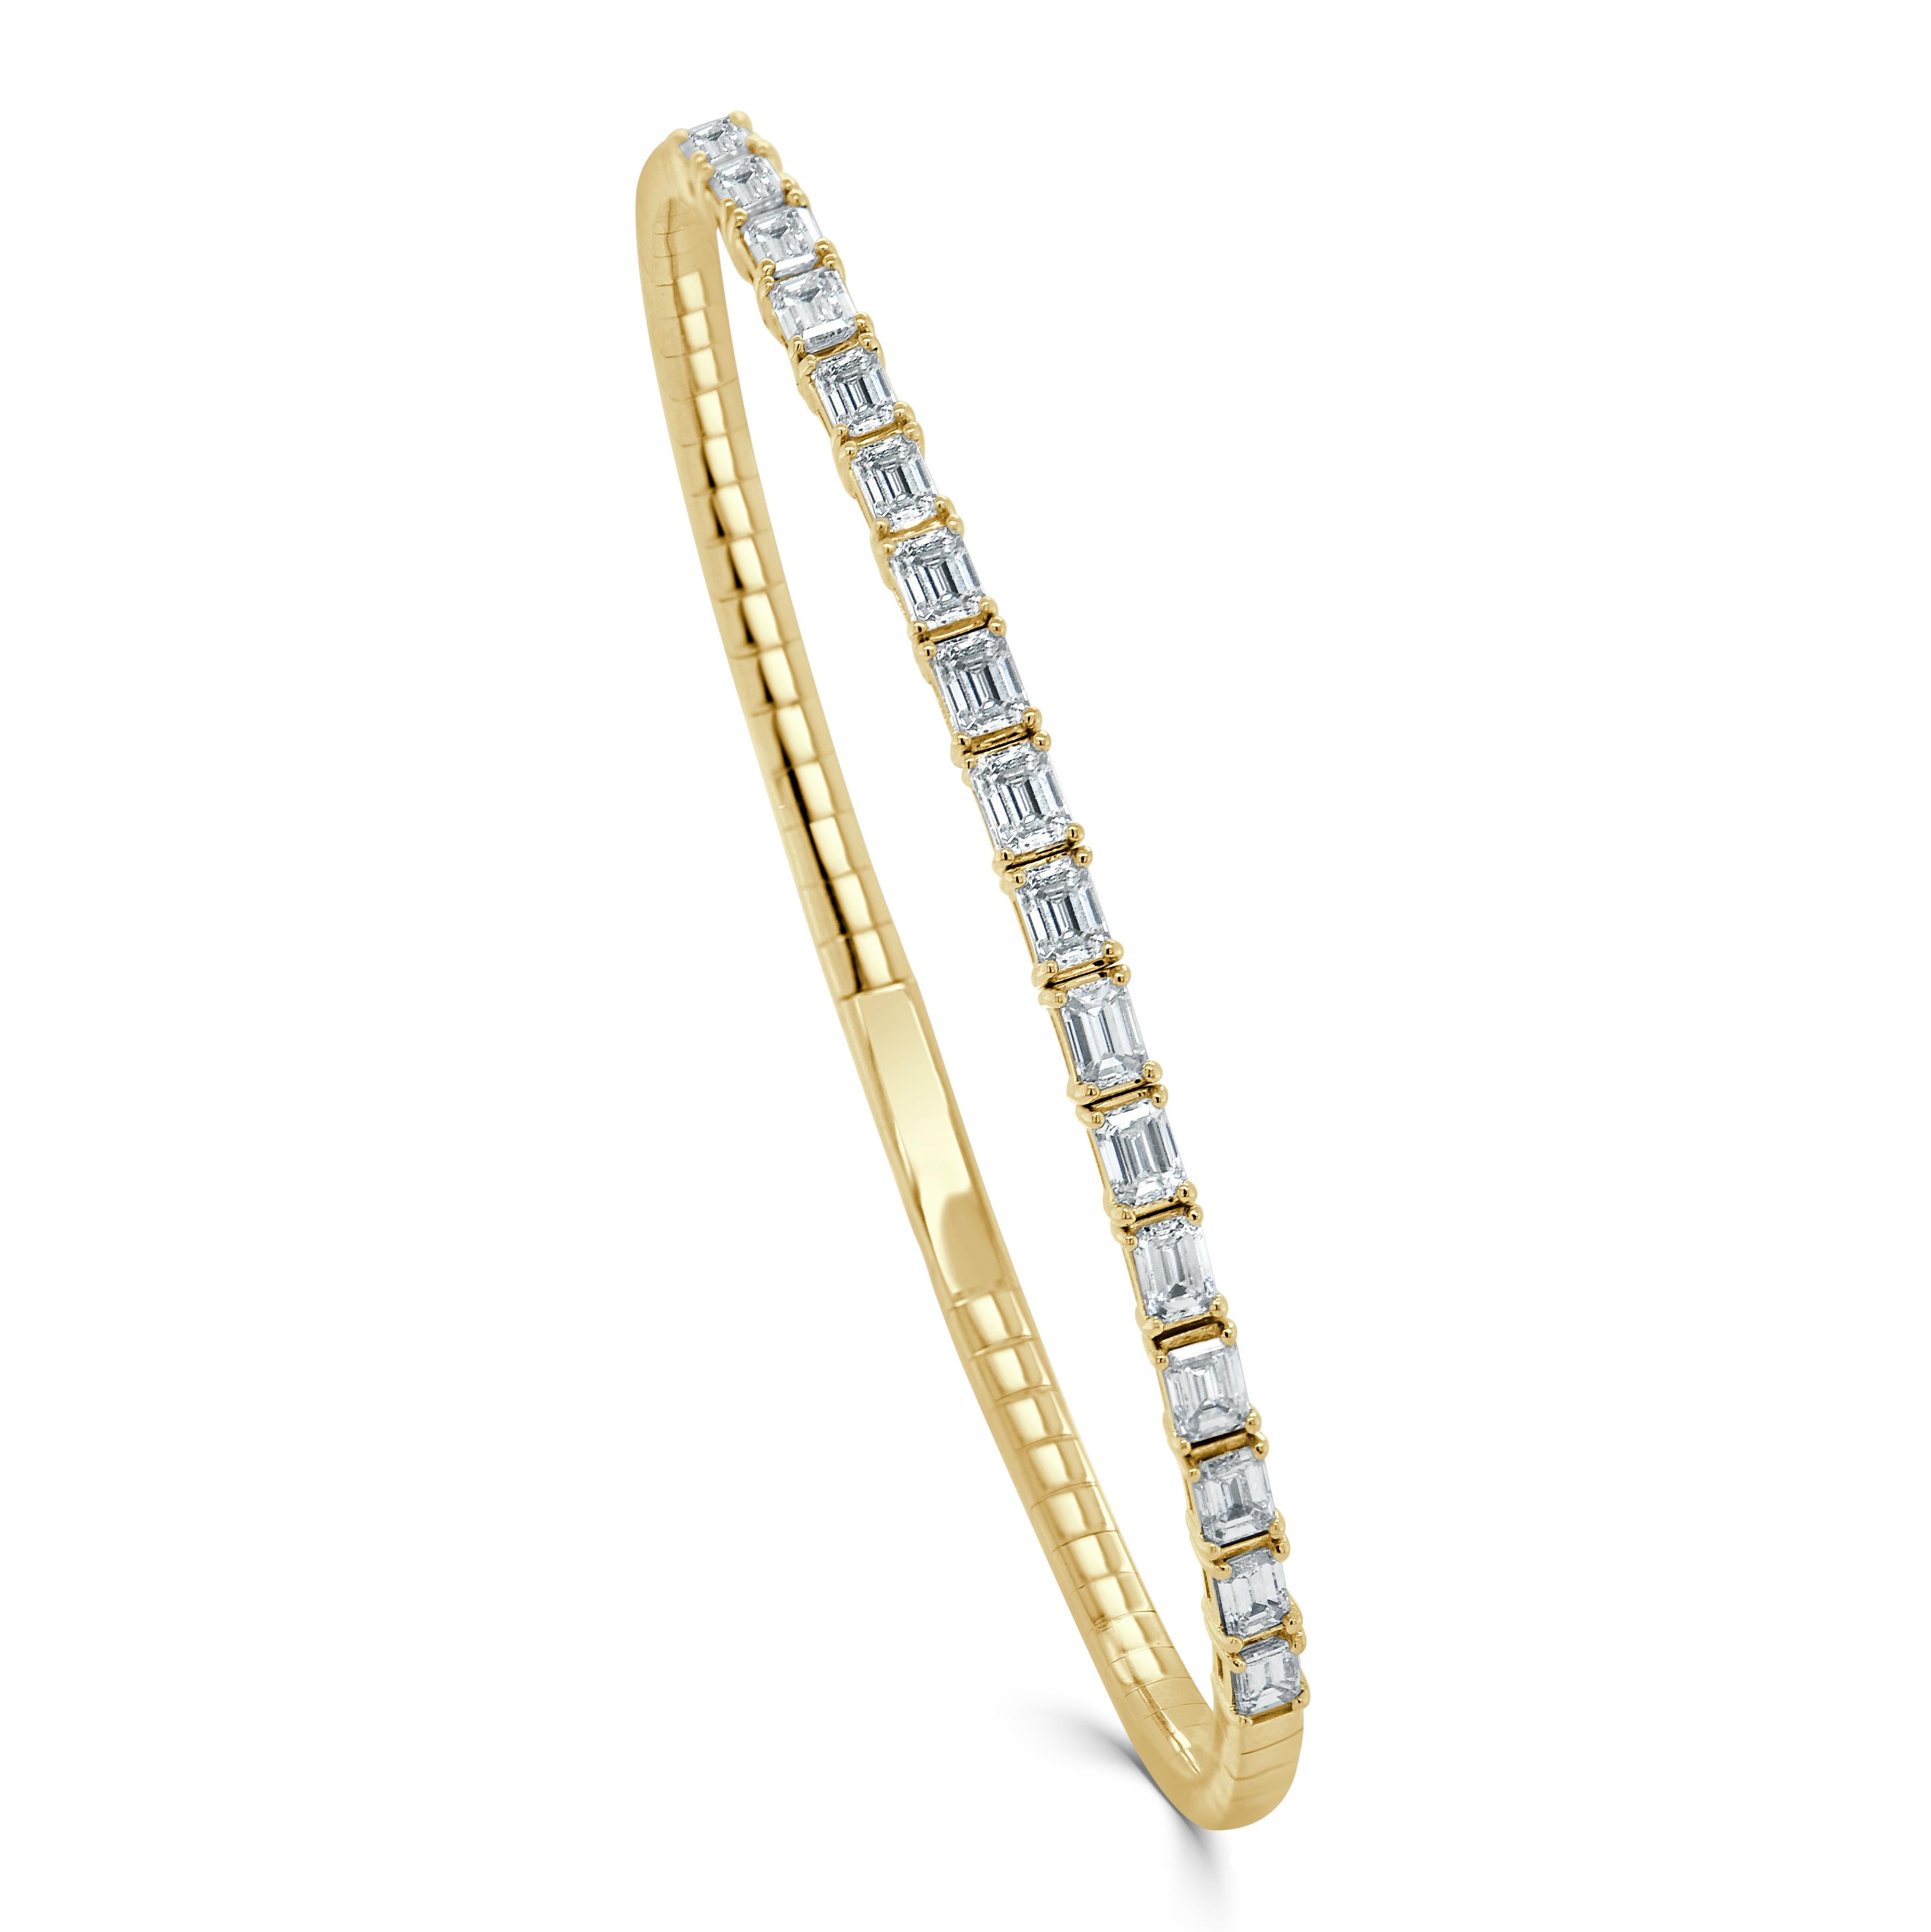 Quality Flexible Bangle: Made from real 14k gold with 17 glittering emerald cut white diamonds approximately 2.26 ct. Certified diamonds, featuring a single row of emerald cut white diamonds flexible diameter for comfort with a color and clarity of